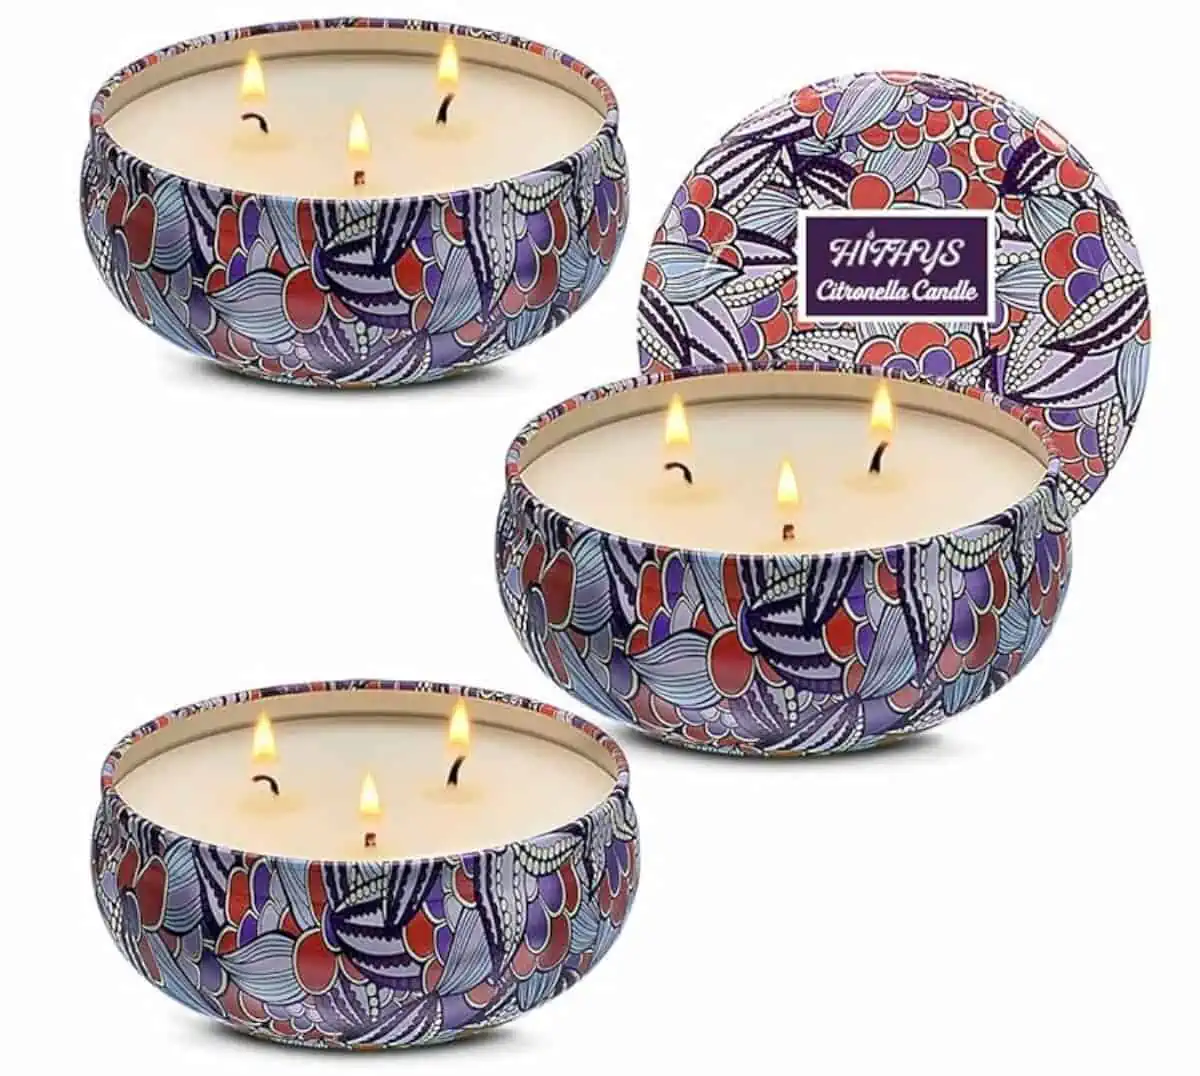 Three Hithys brand candle tins.